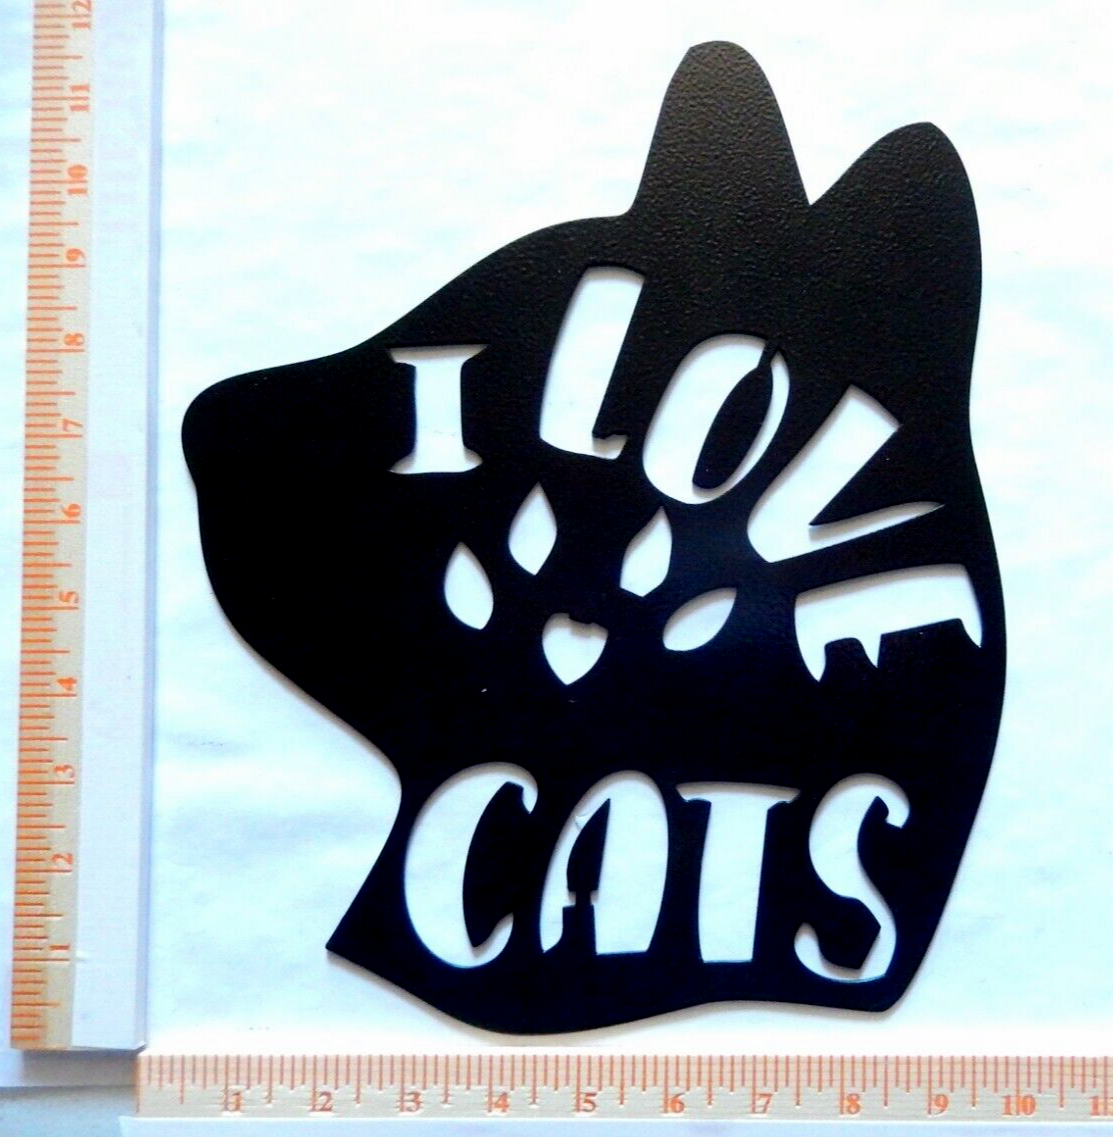 "I LOVE PAW CATS" 14 gauge thick Powder Coated  Metal Wall Art 12"x10